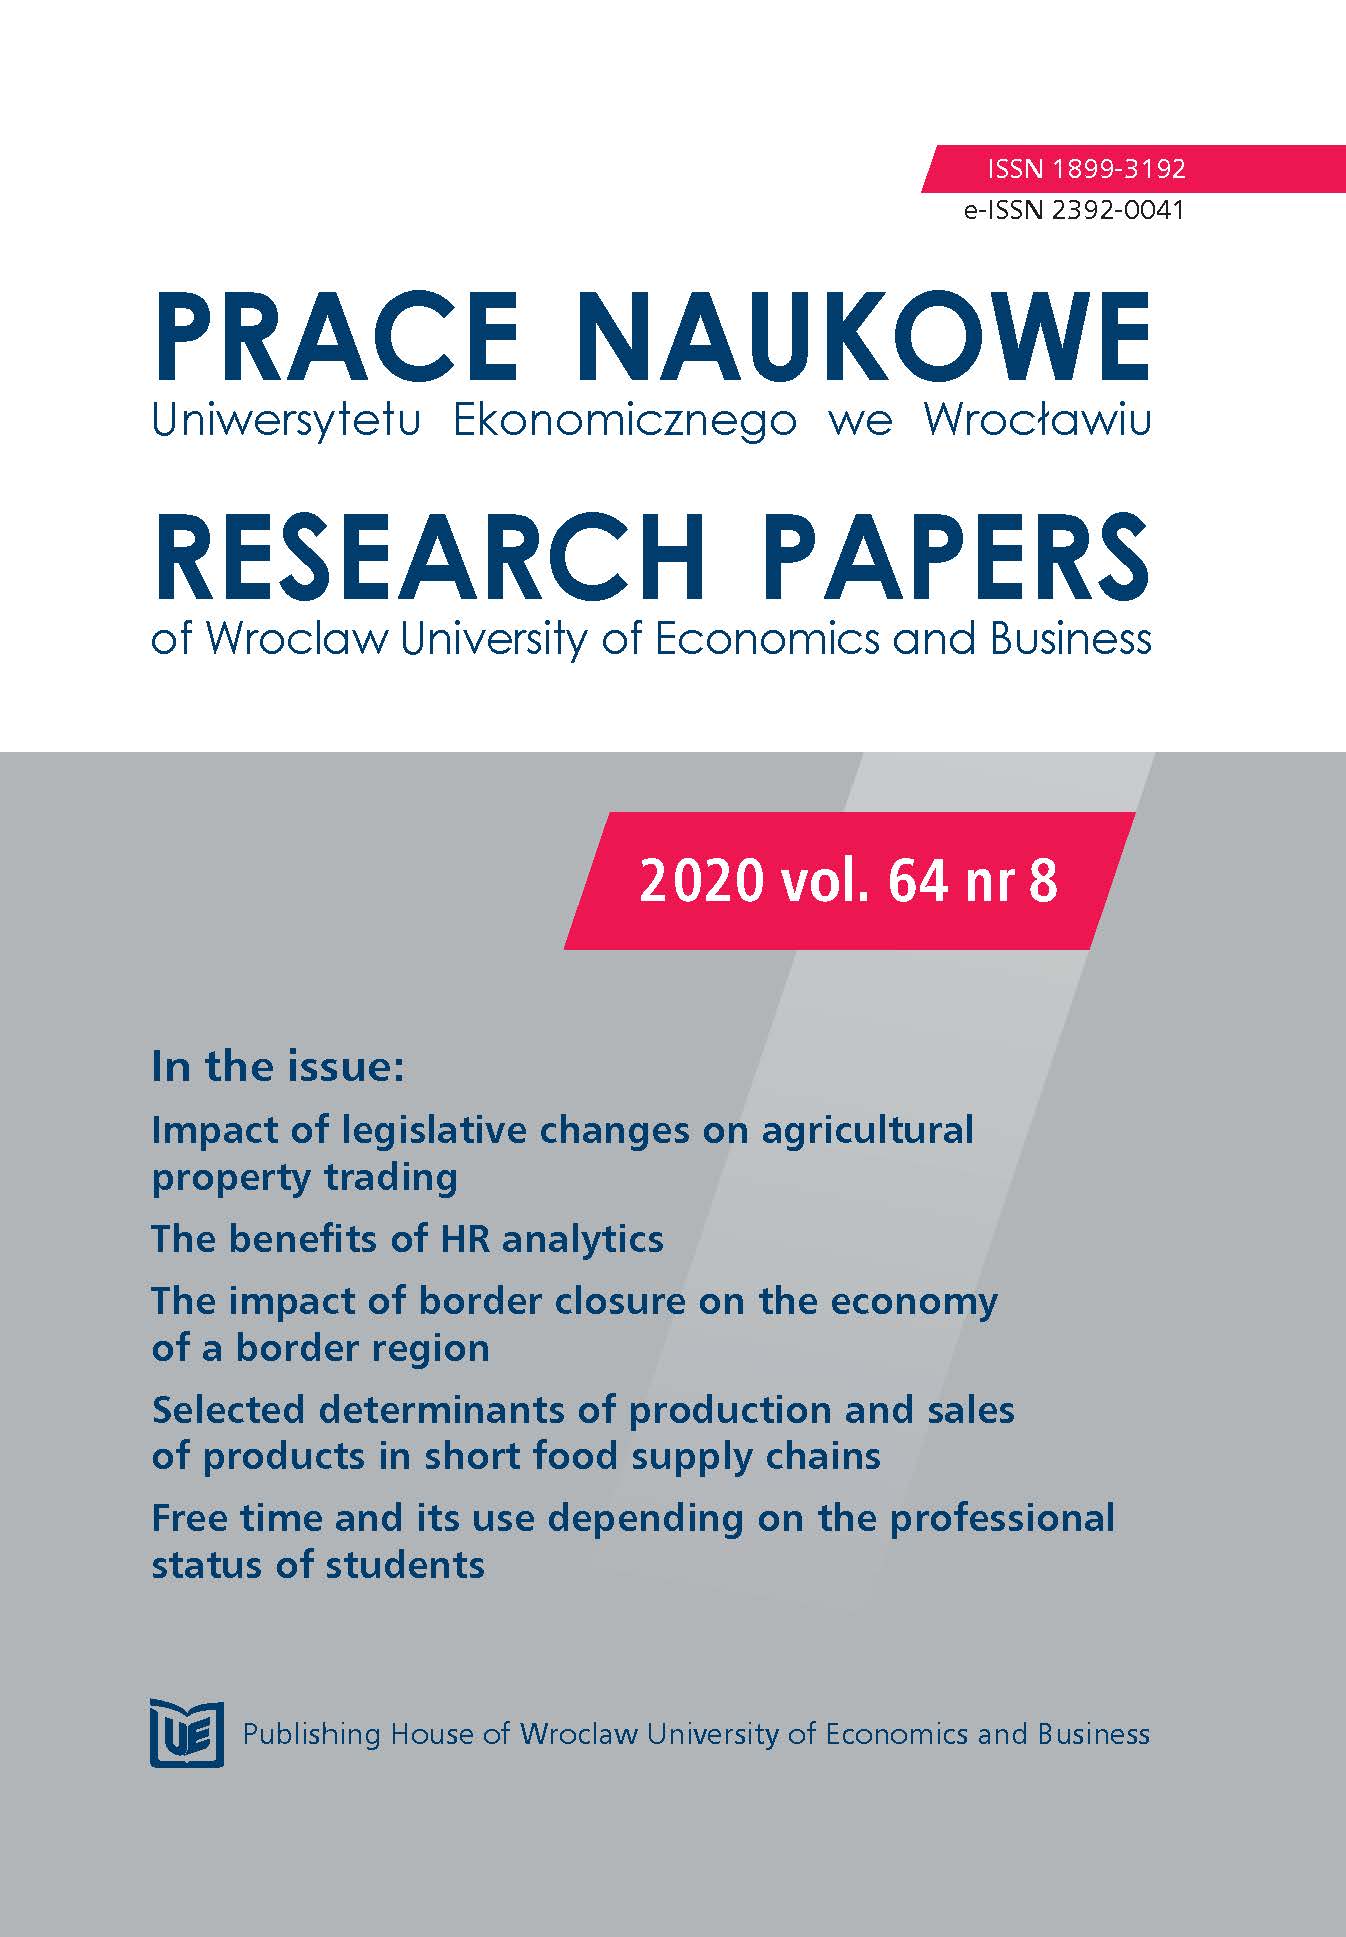 The impact of border closure on the economy of a border region – as exemplified by the Polish-German borderland Cover Image